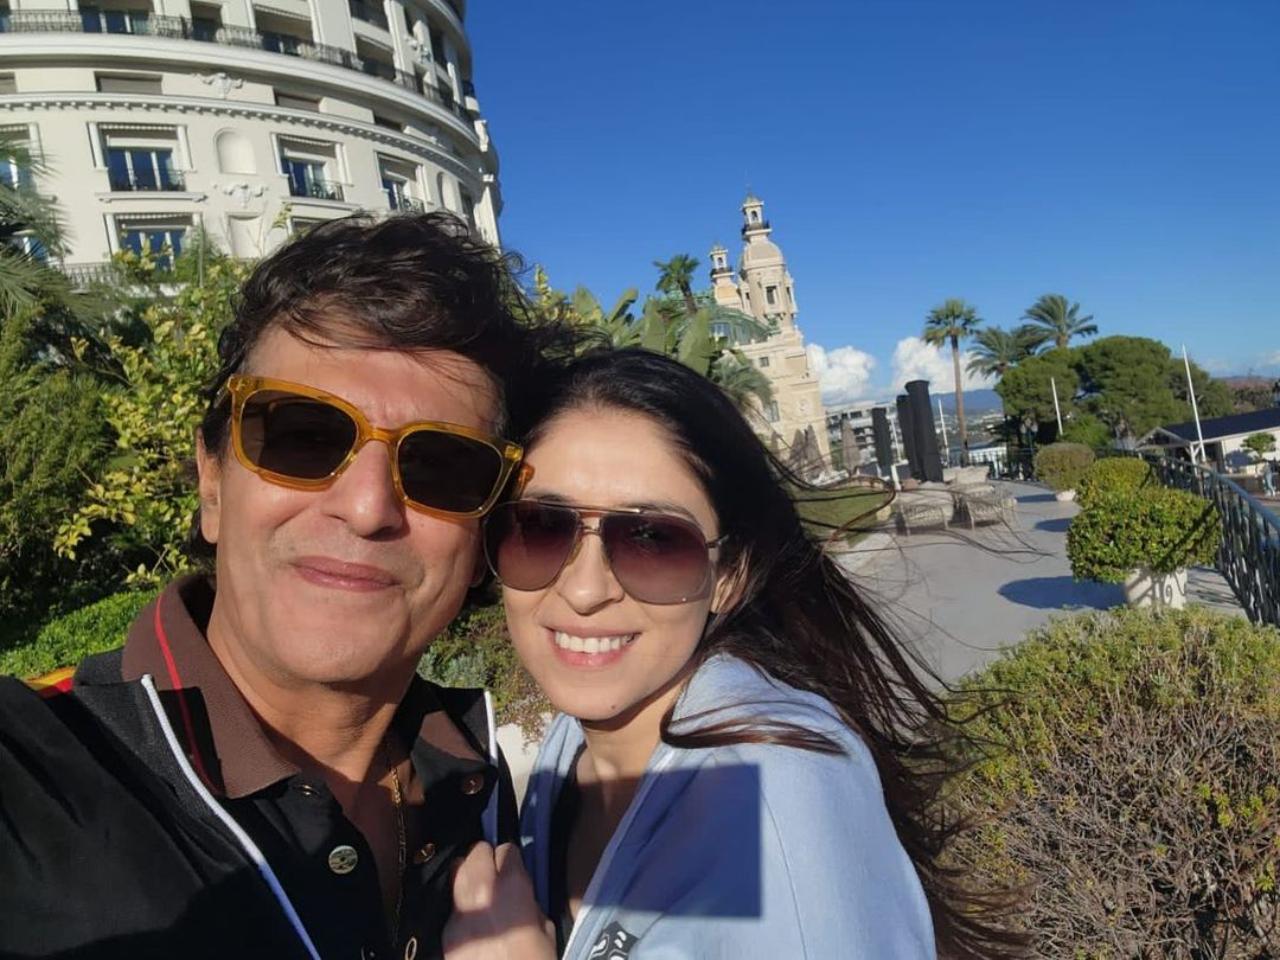 Bhavana and Chunky recently renewed their vows and the same was documented on the popular Netflix show 'Fabulous Lives of Bollywood Wives'. Bhavan shared a selfie clicked by Chunky with the stunning scenery of Monaco in the background